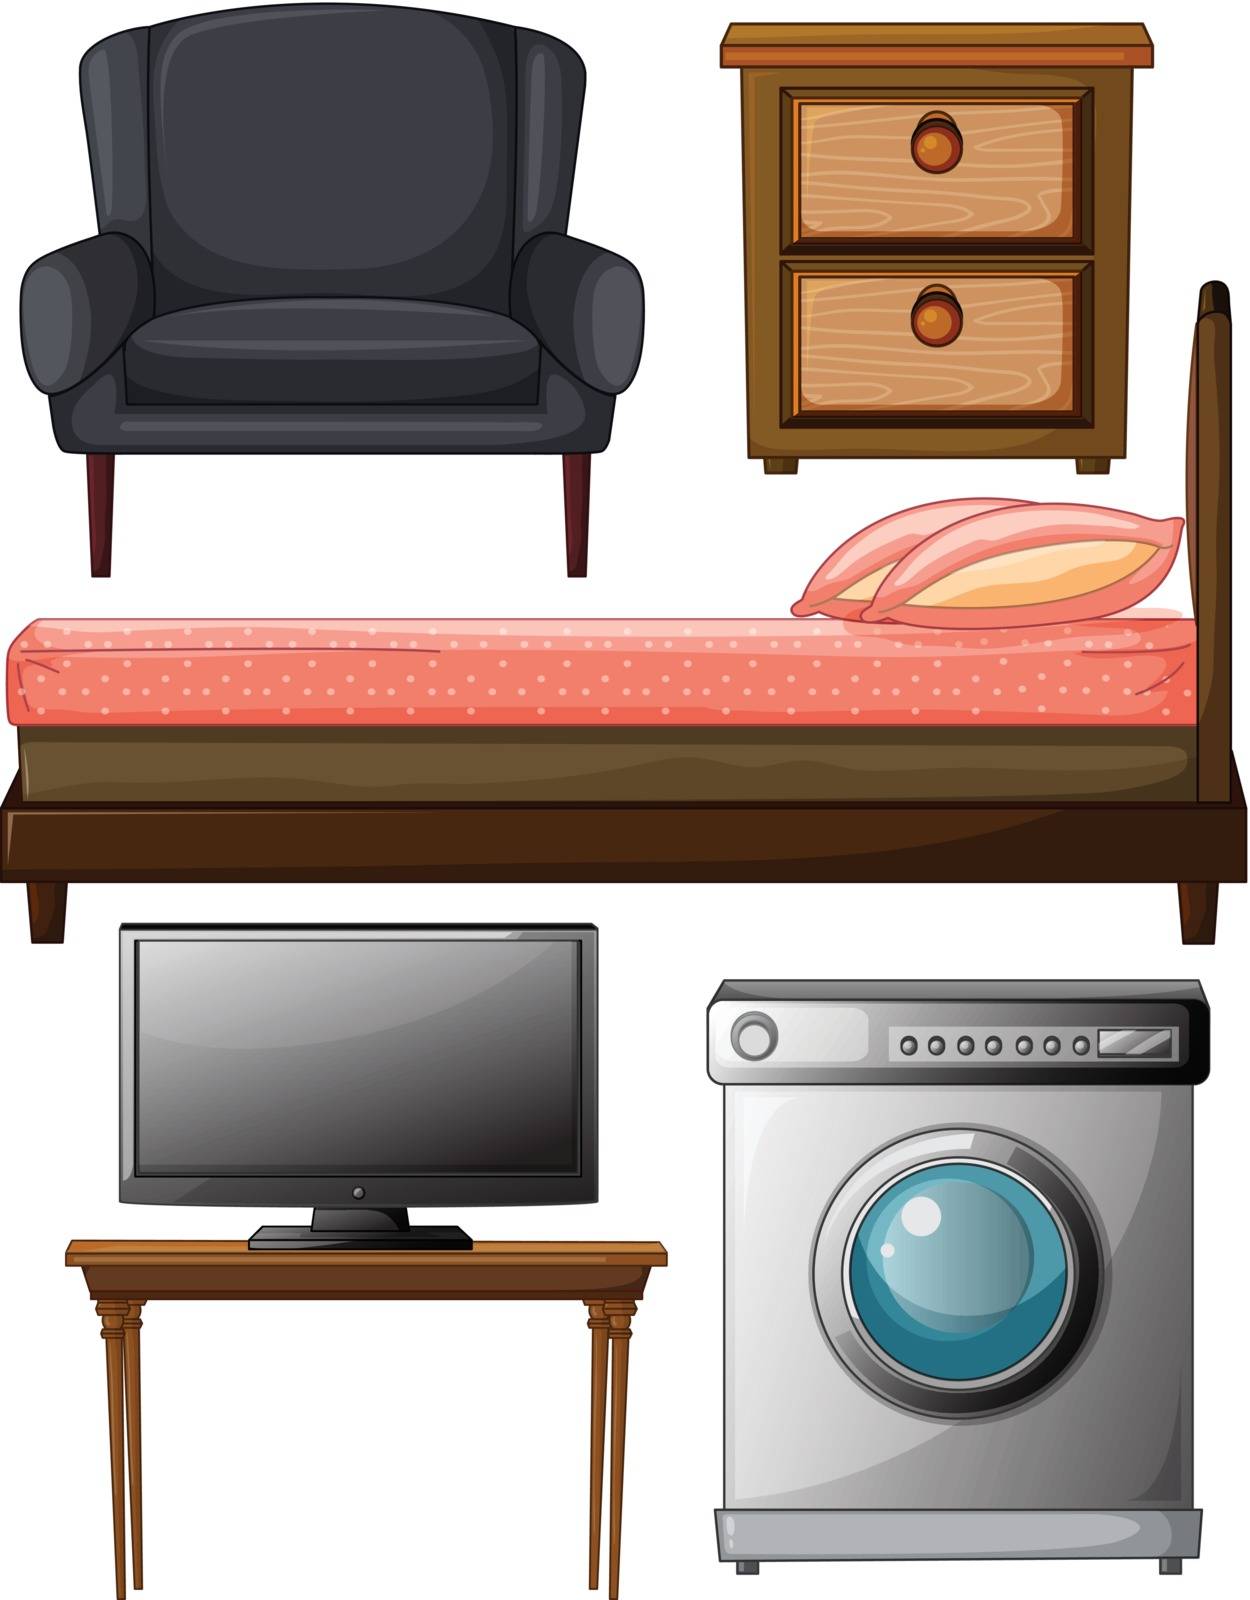 Illustration of useful furnitures on a white background